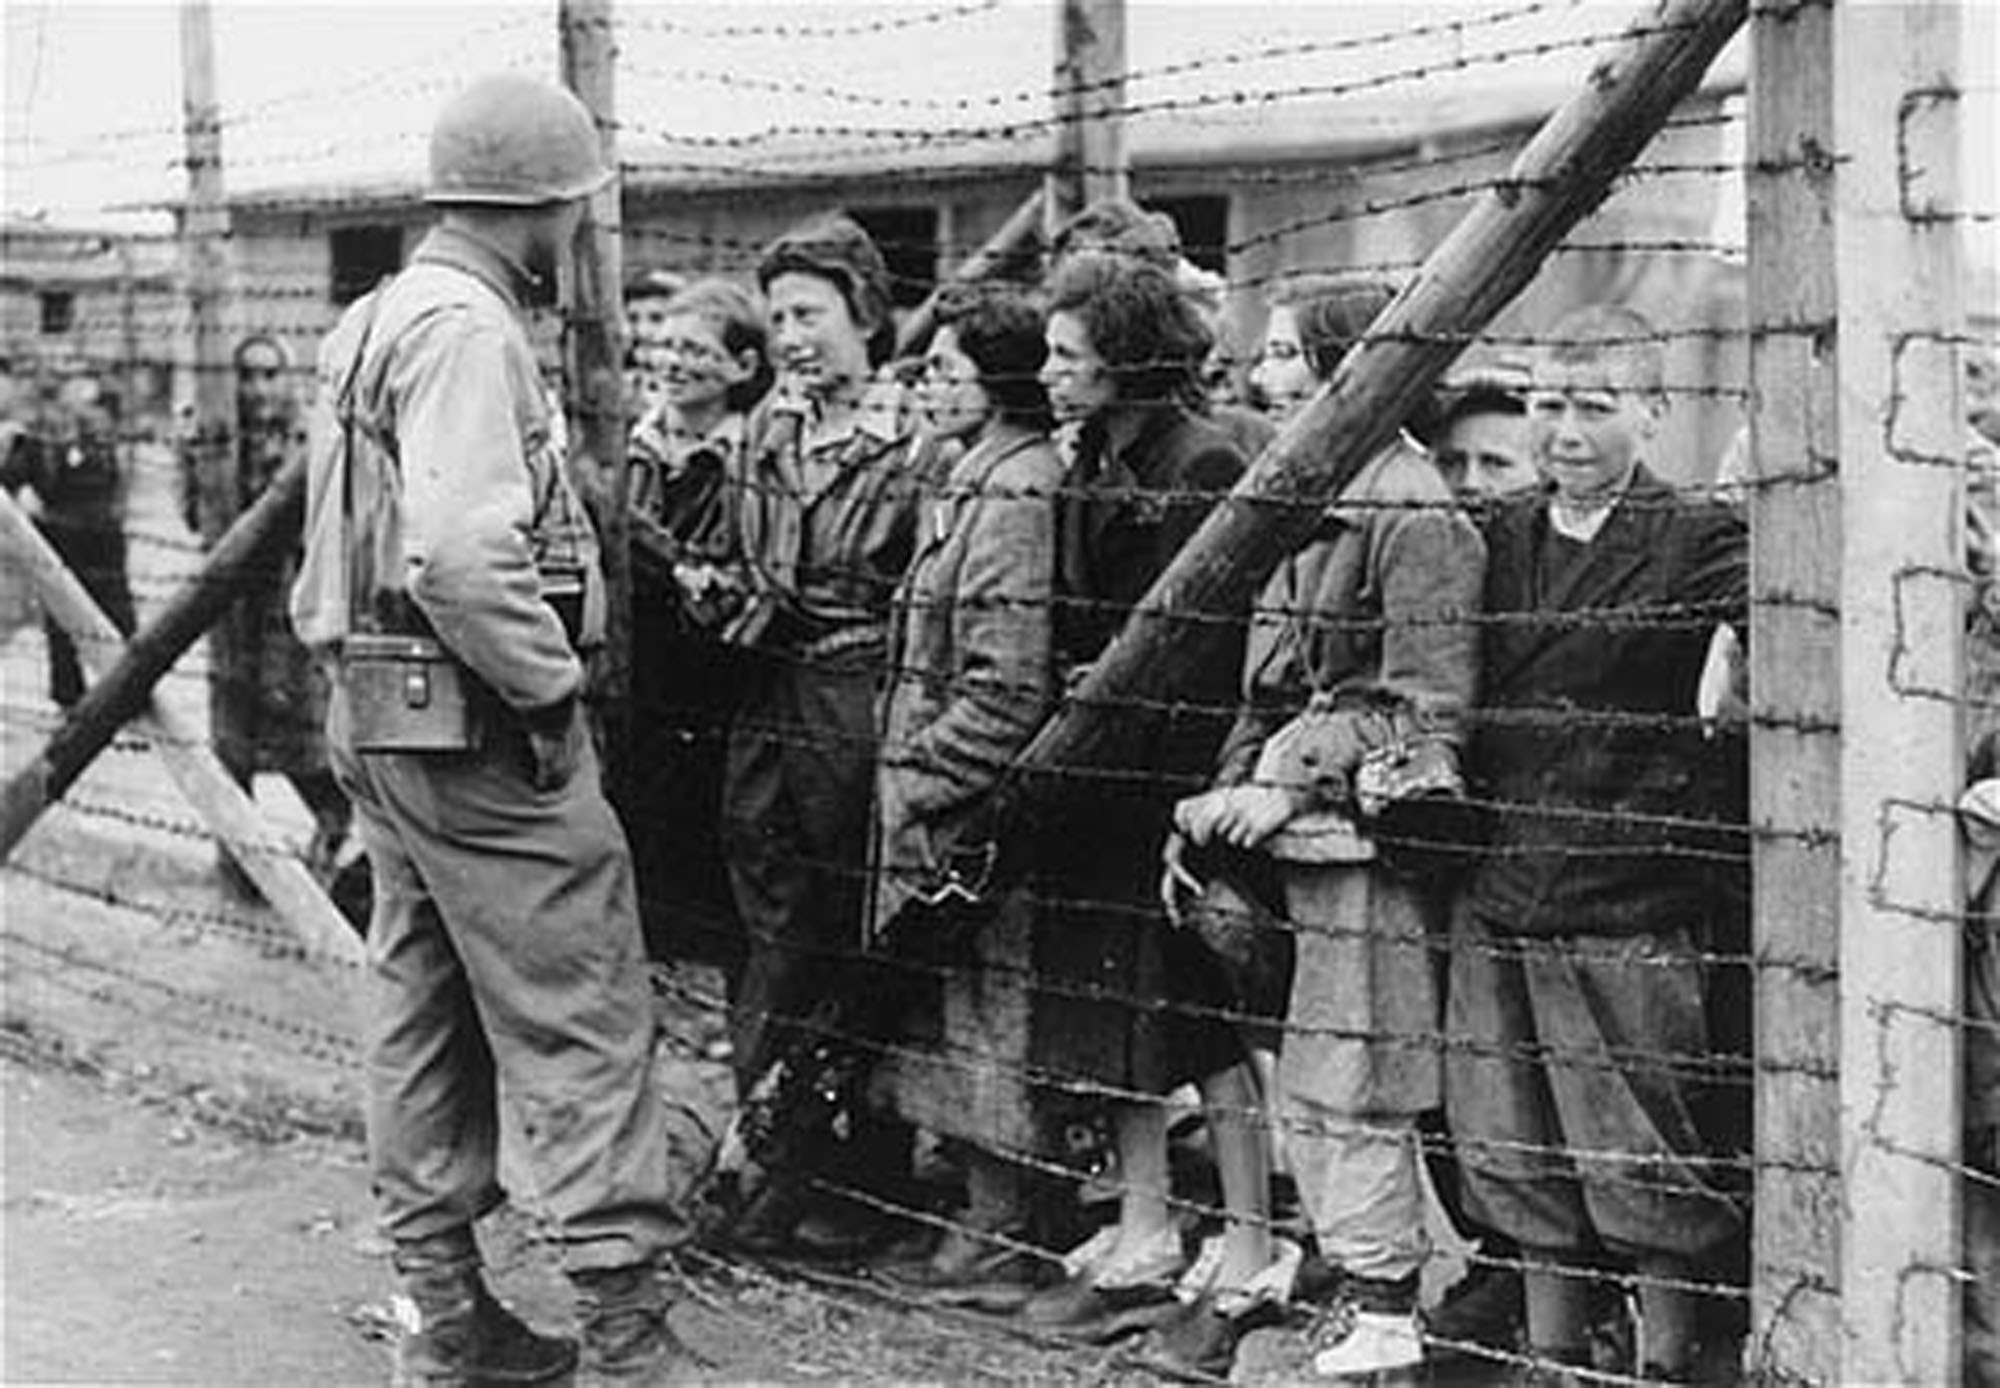 Women and children survivors in Mauthausen speak to an American liberator through a barbed wire fence. Mauthausen, Austria. May 05, 1945-May 07, 1945.
USHMM, National Archives and Records Administration (courtesy photo)